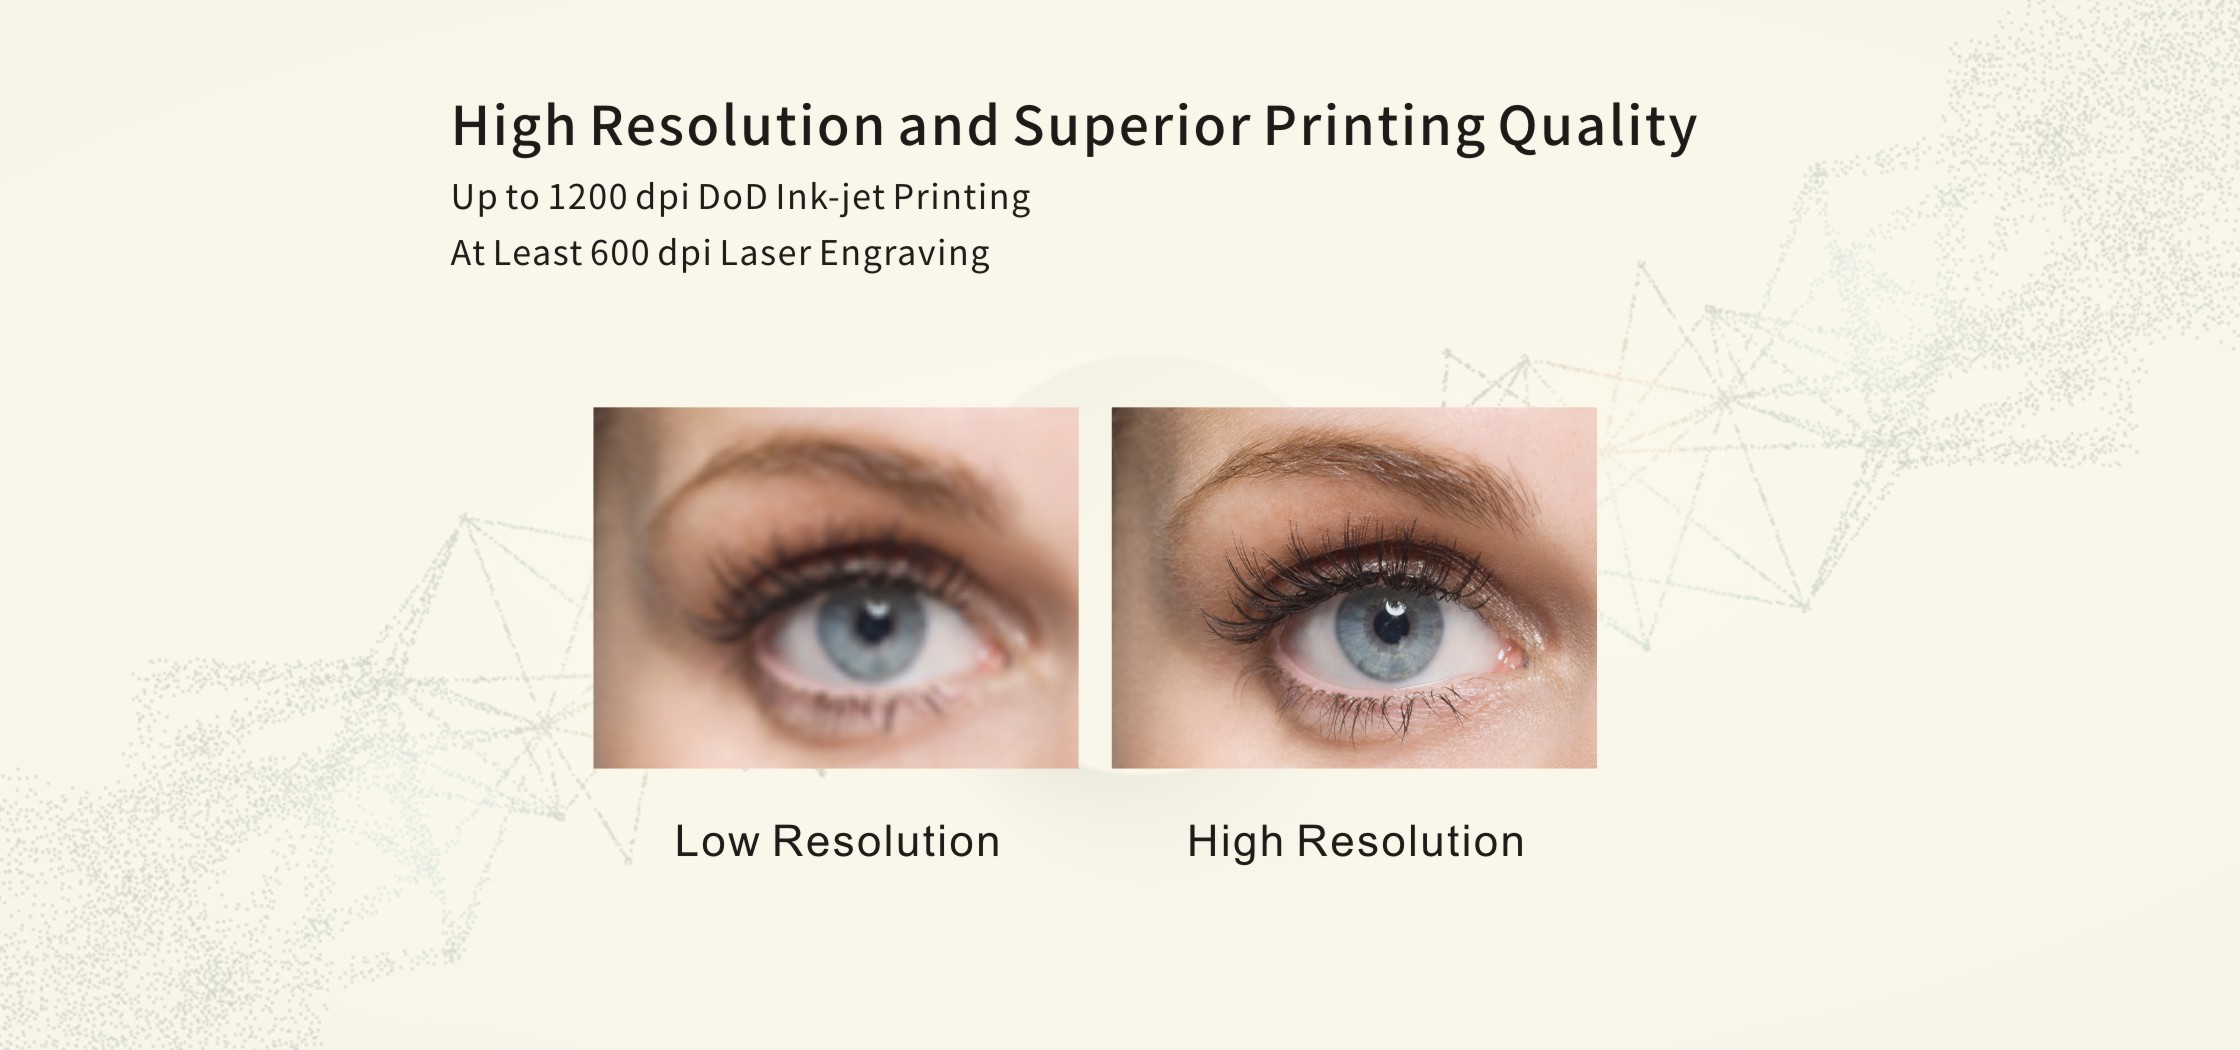 High Resolution and Superior Printing Quality